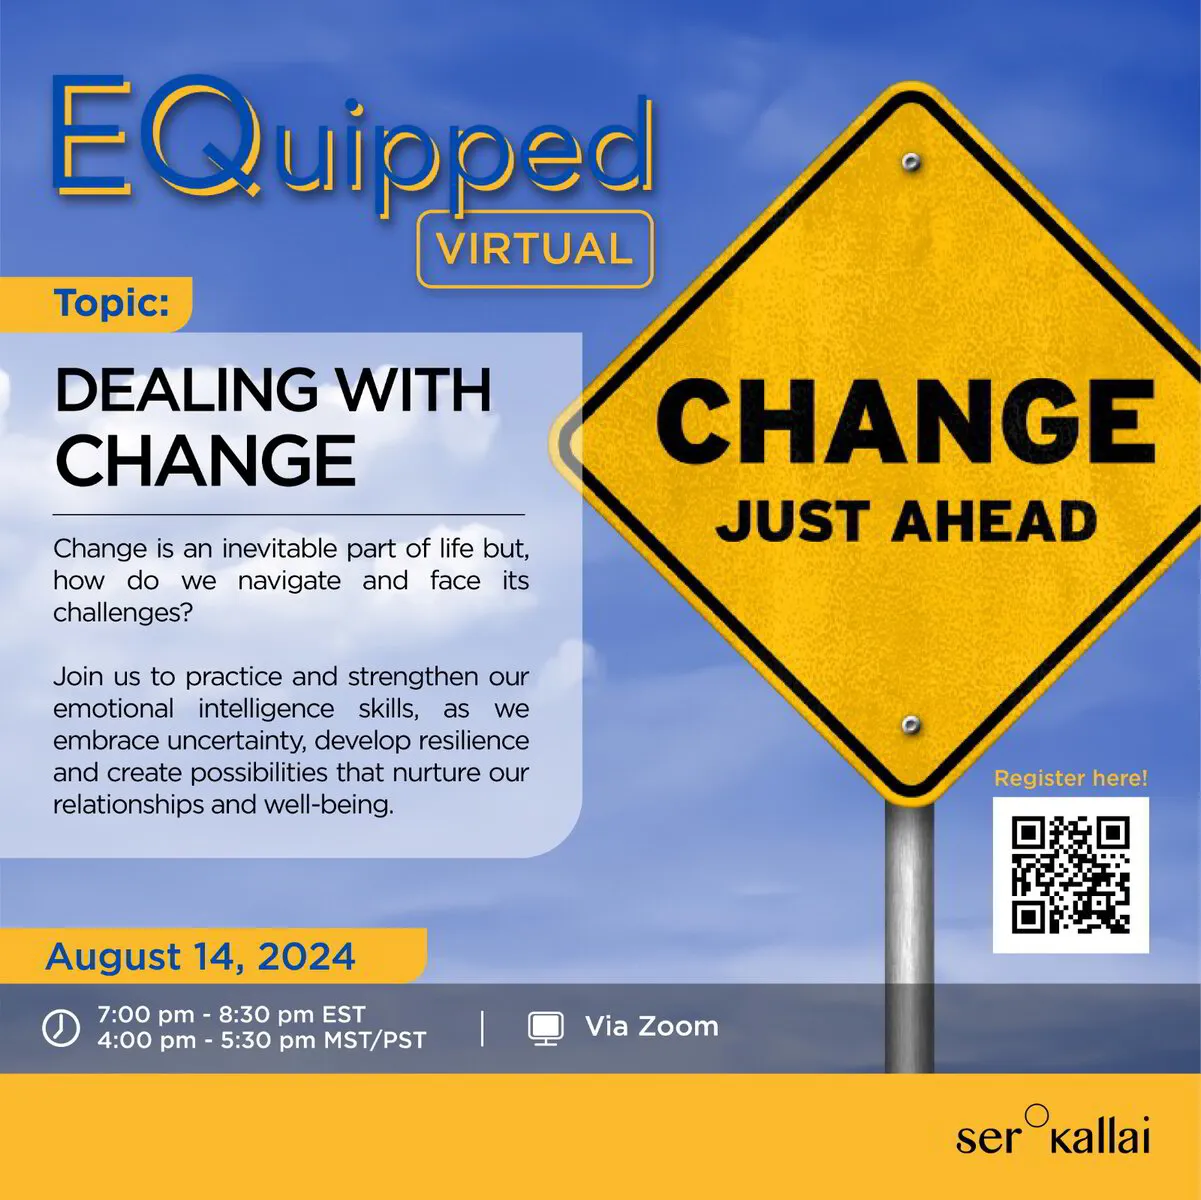 EQuipped - Dealing with Change (Virtual)